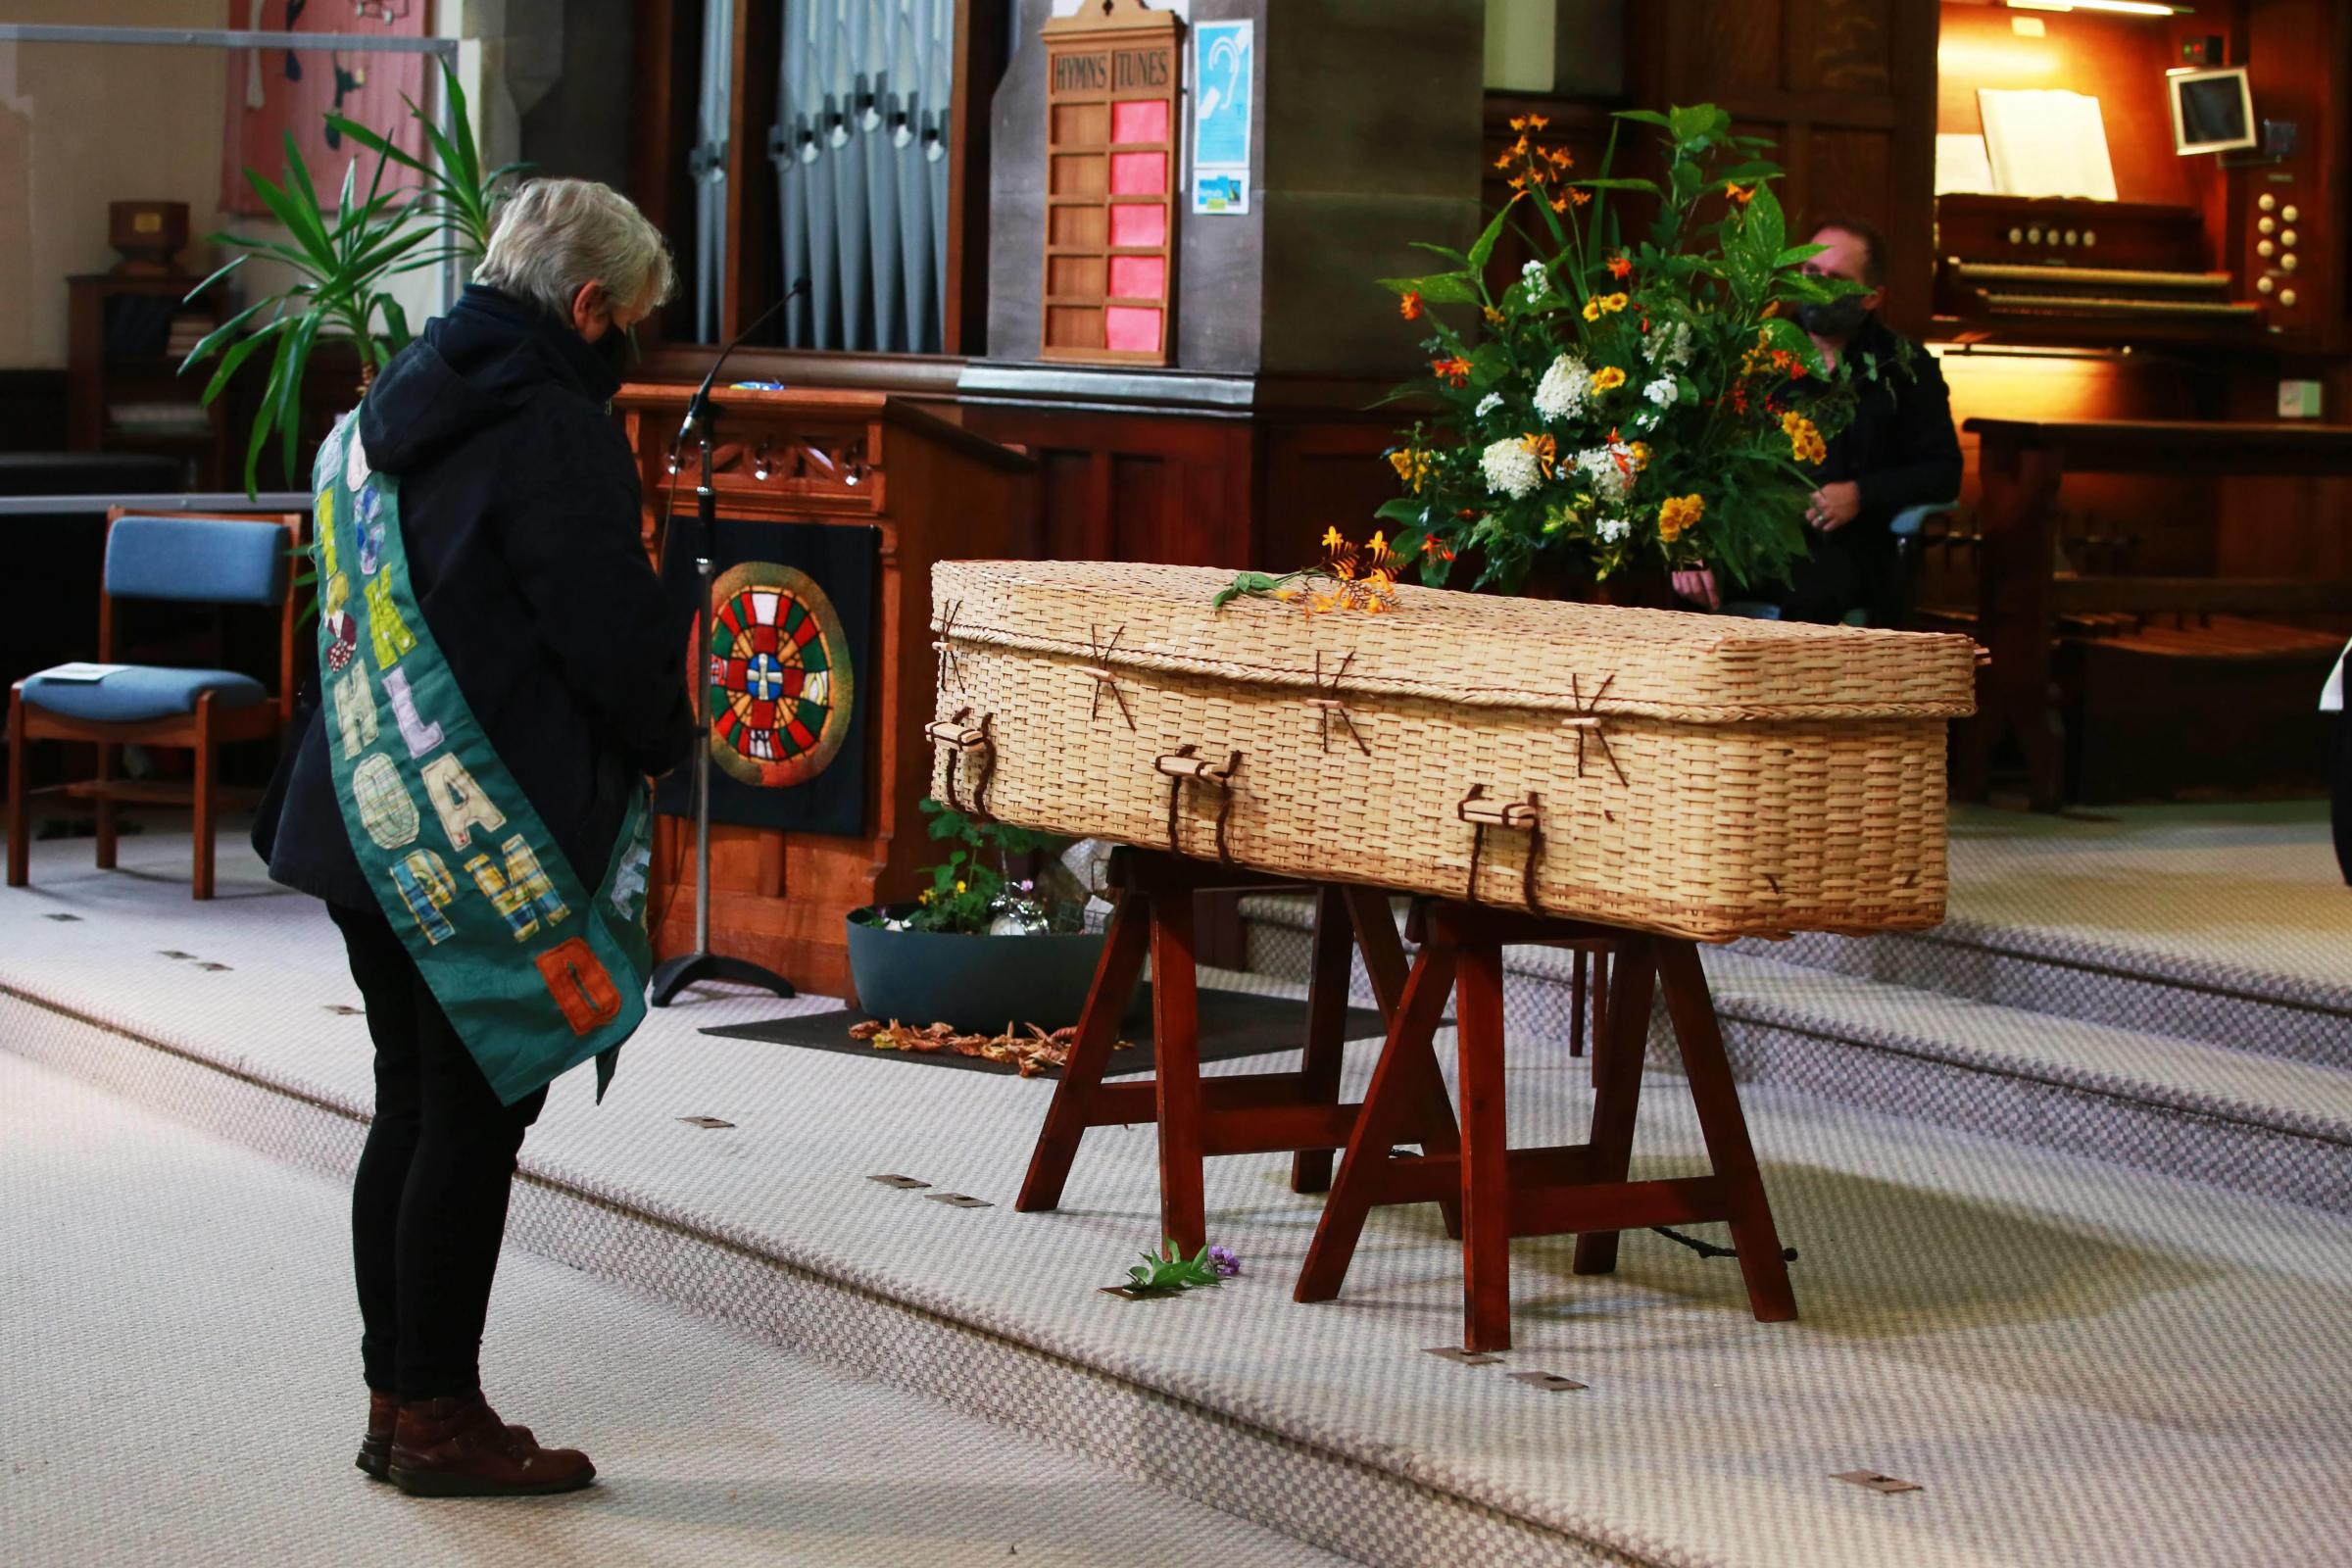 Bishop Auckland Methodist in Bishop Auckland held a funeral service to mourn the loss of biodiversity and climate change Picture: SARAH CALDECOTT